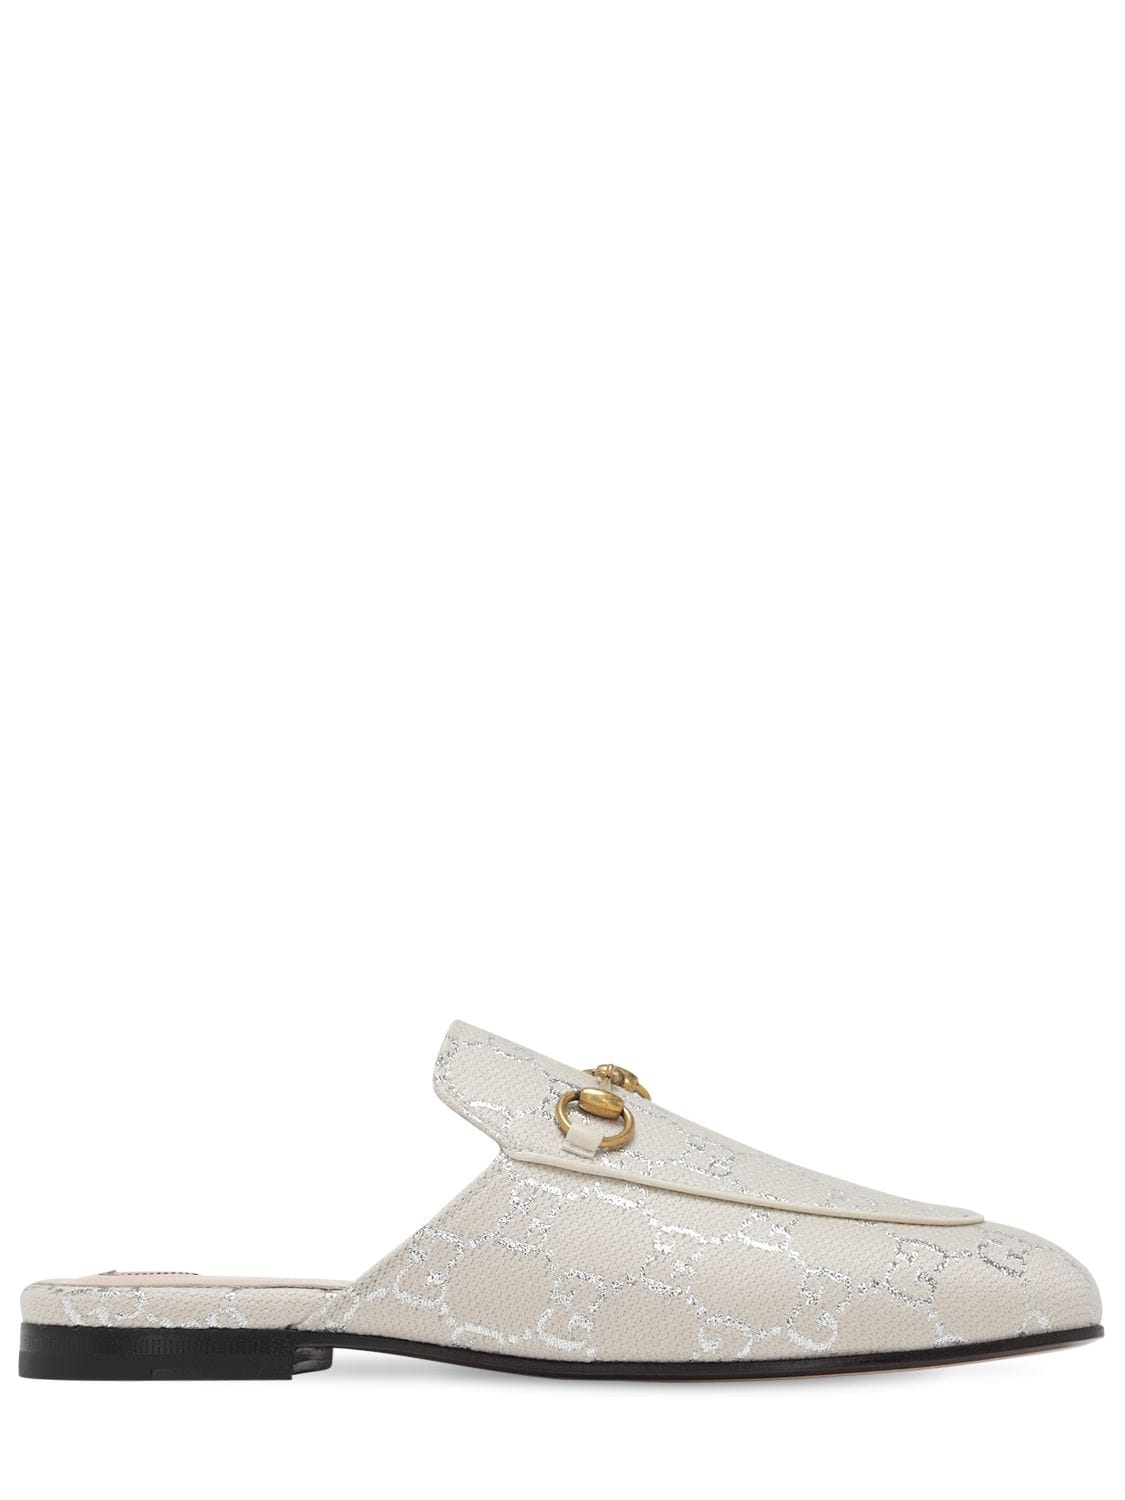 Gucci 10mm Princetown Lamé Jacquard Mules In Off White